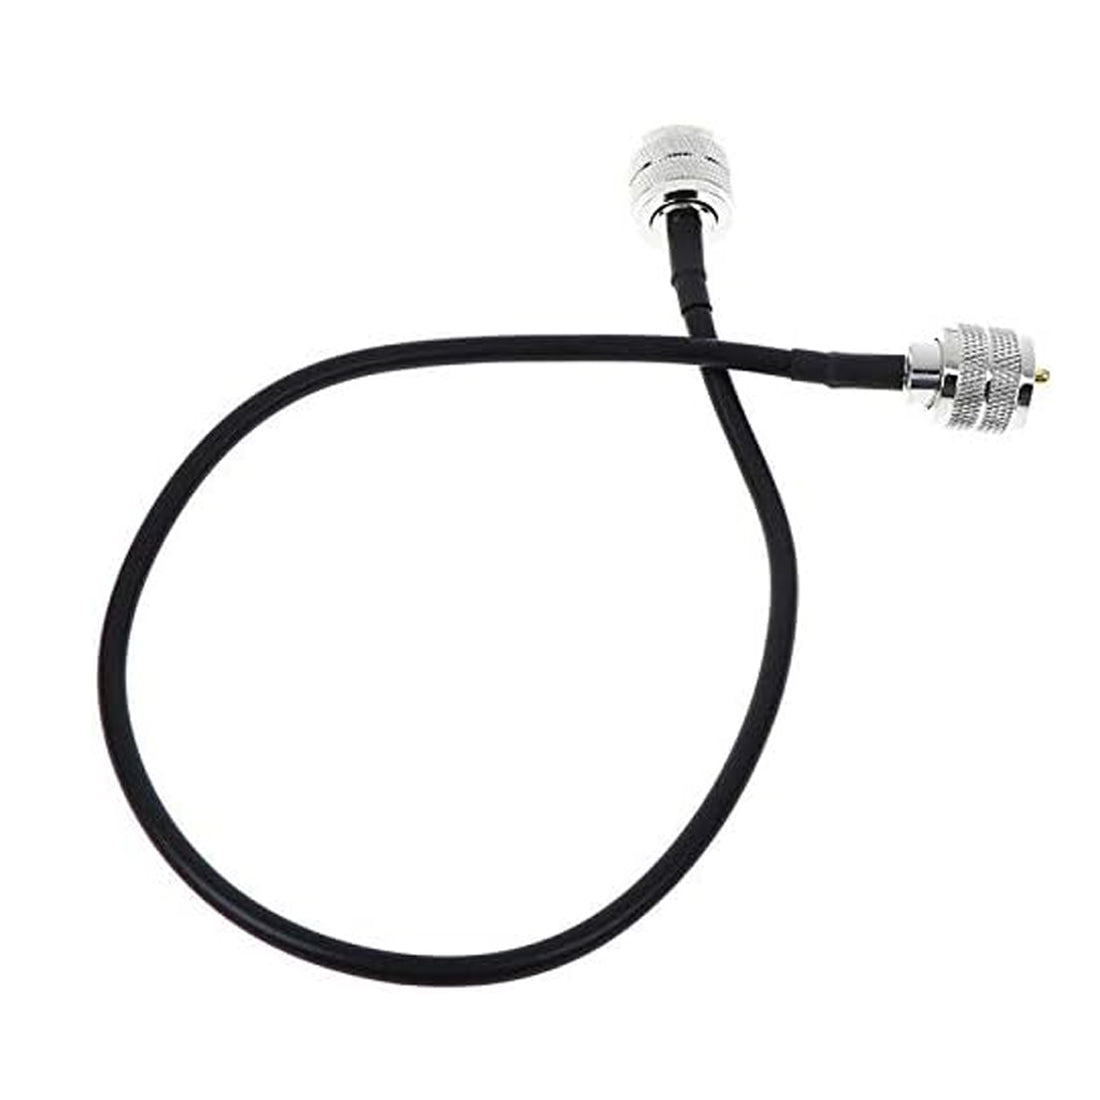 Midland Connecting cable for CB transceivers Midland R 90-58-U T193, transceiver cable 90 cm